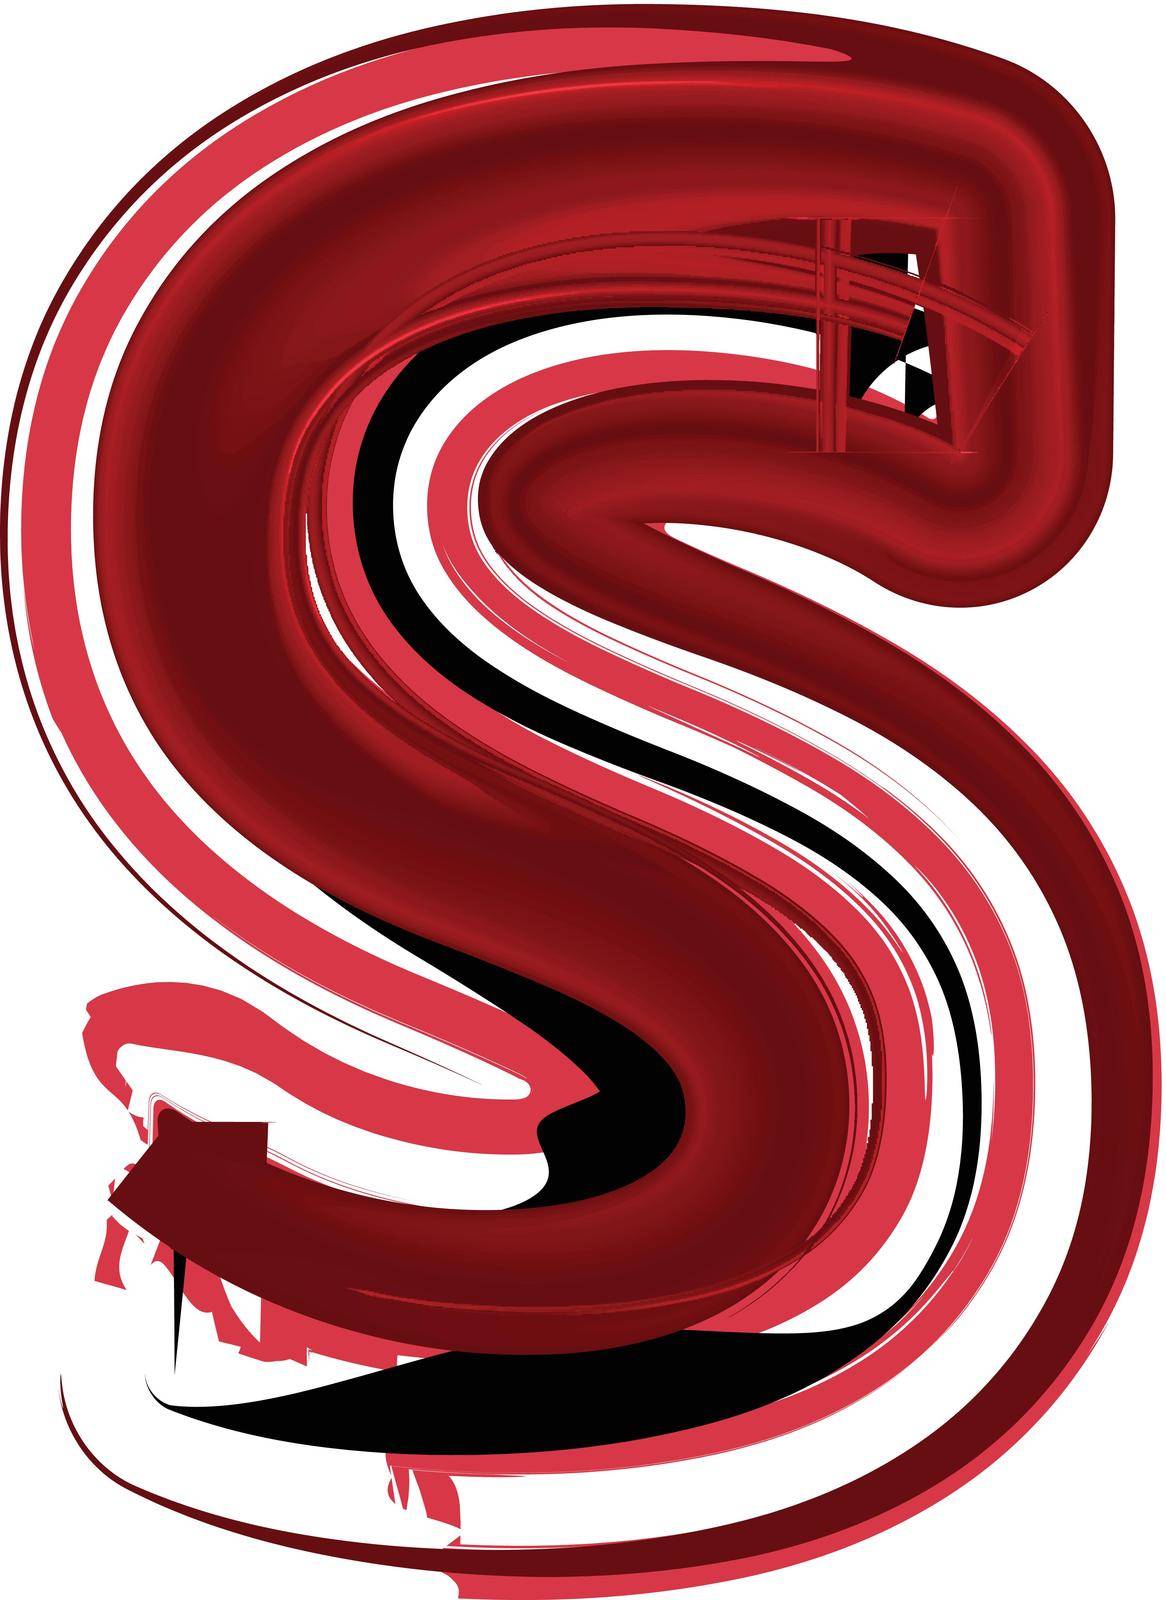 Abstract Letter S by aroas